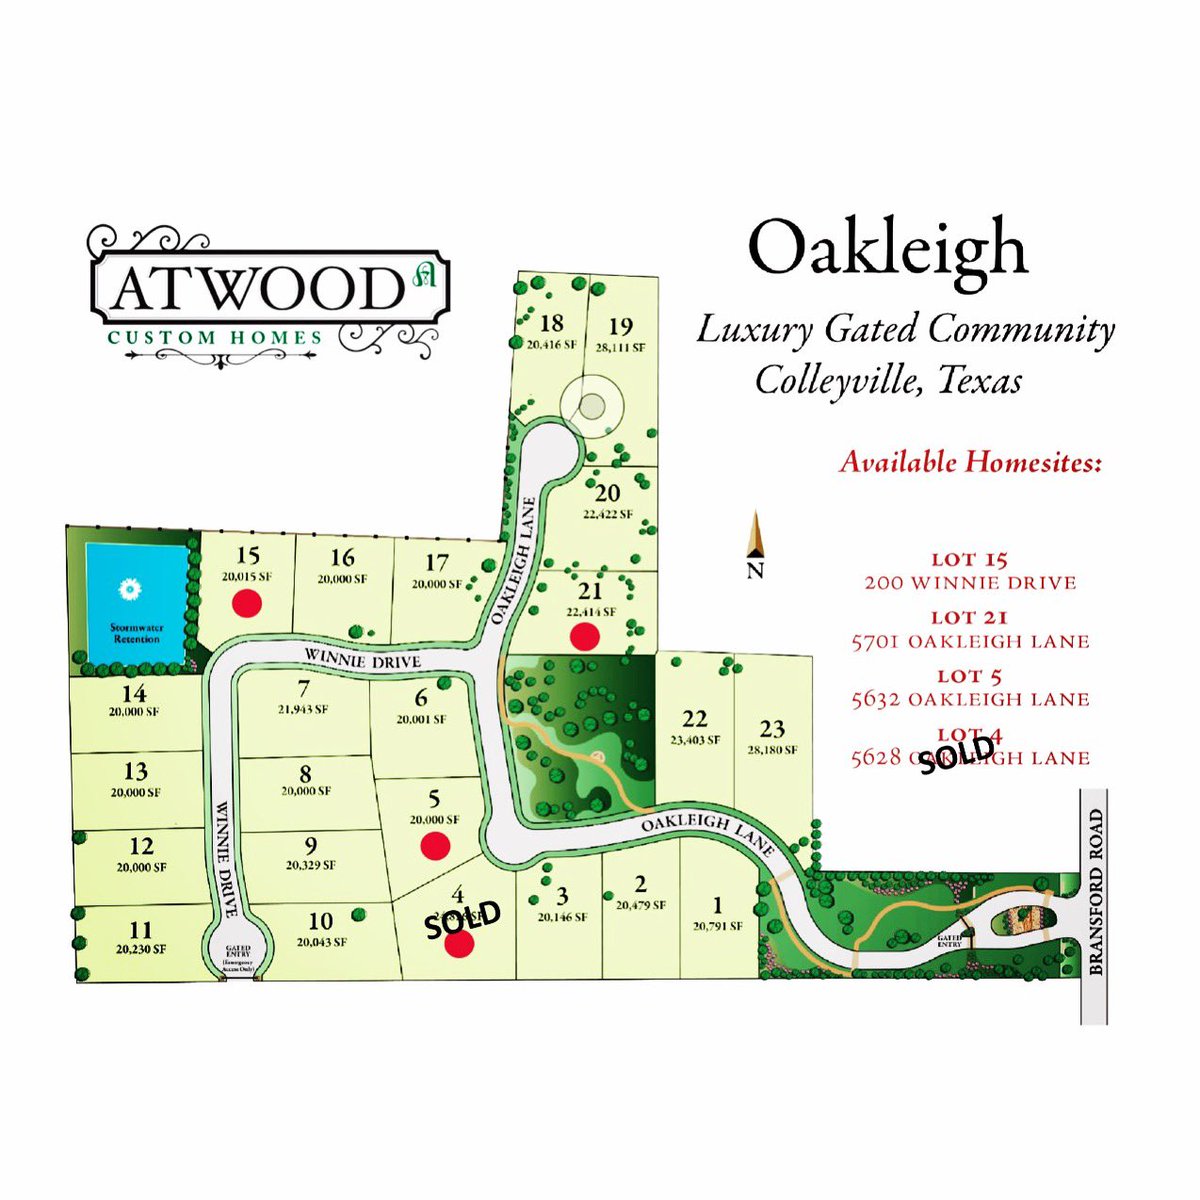 Available luxury gated homesites. Located in exclusive neighborhood of Oakleigh in Colleyville #atwoodcustomhomes #theultimatedreamhome #jeannieandersongroup #architecture #milliondollarlisting #pictureoftheday #nowavailable #colleyville #dfw #fortworth #lifestyleliving